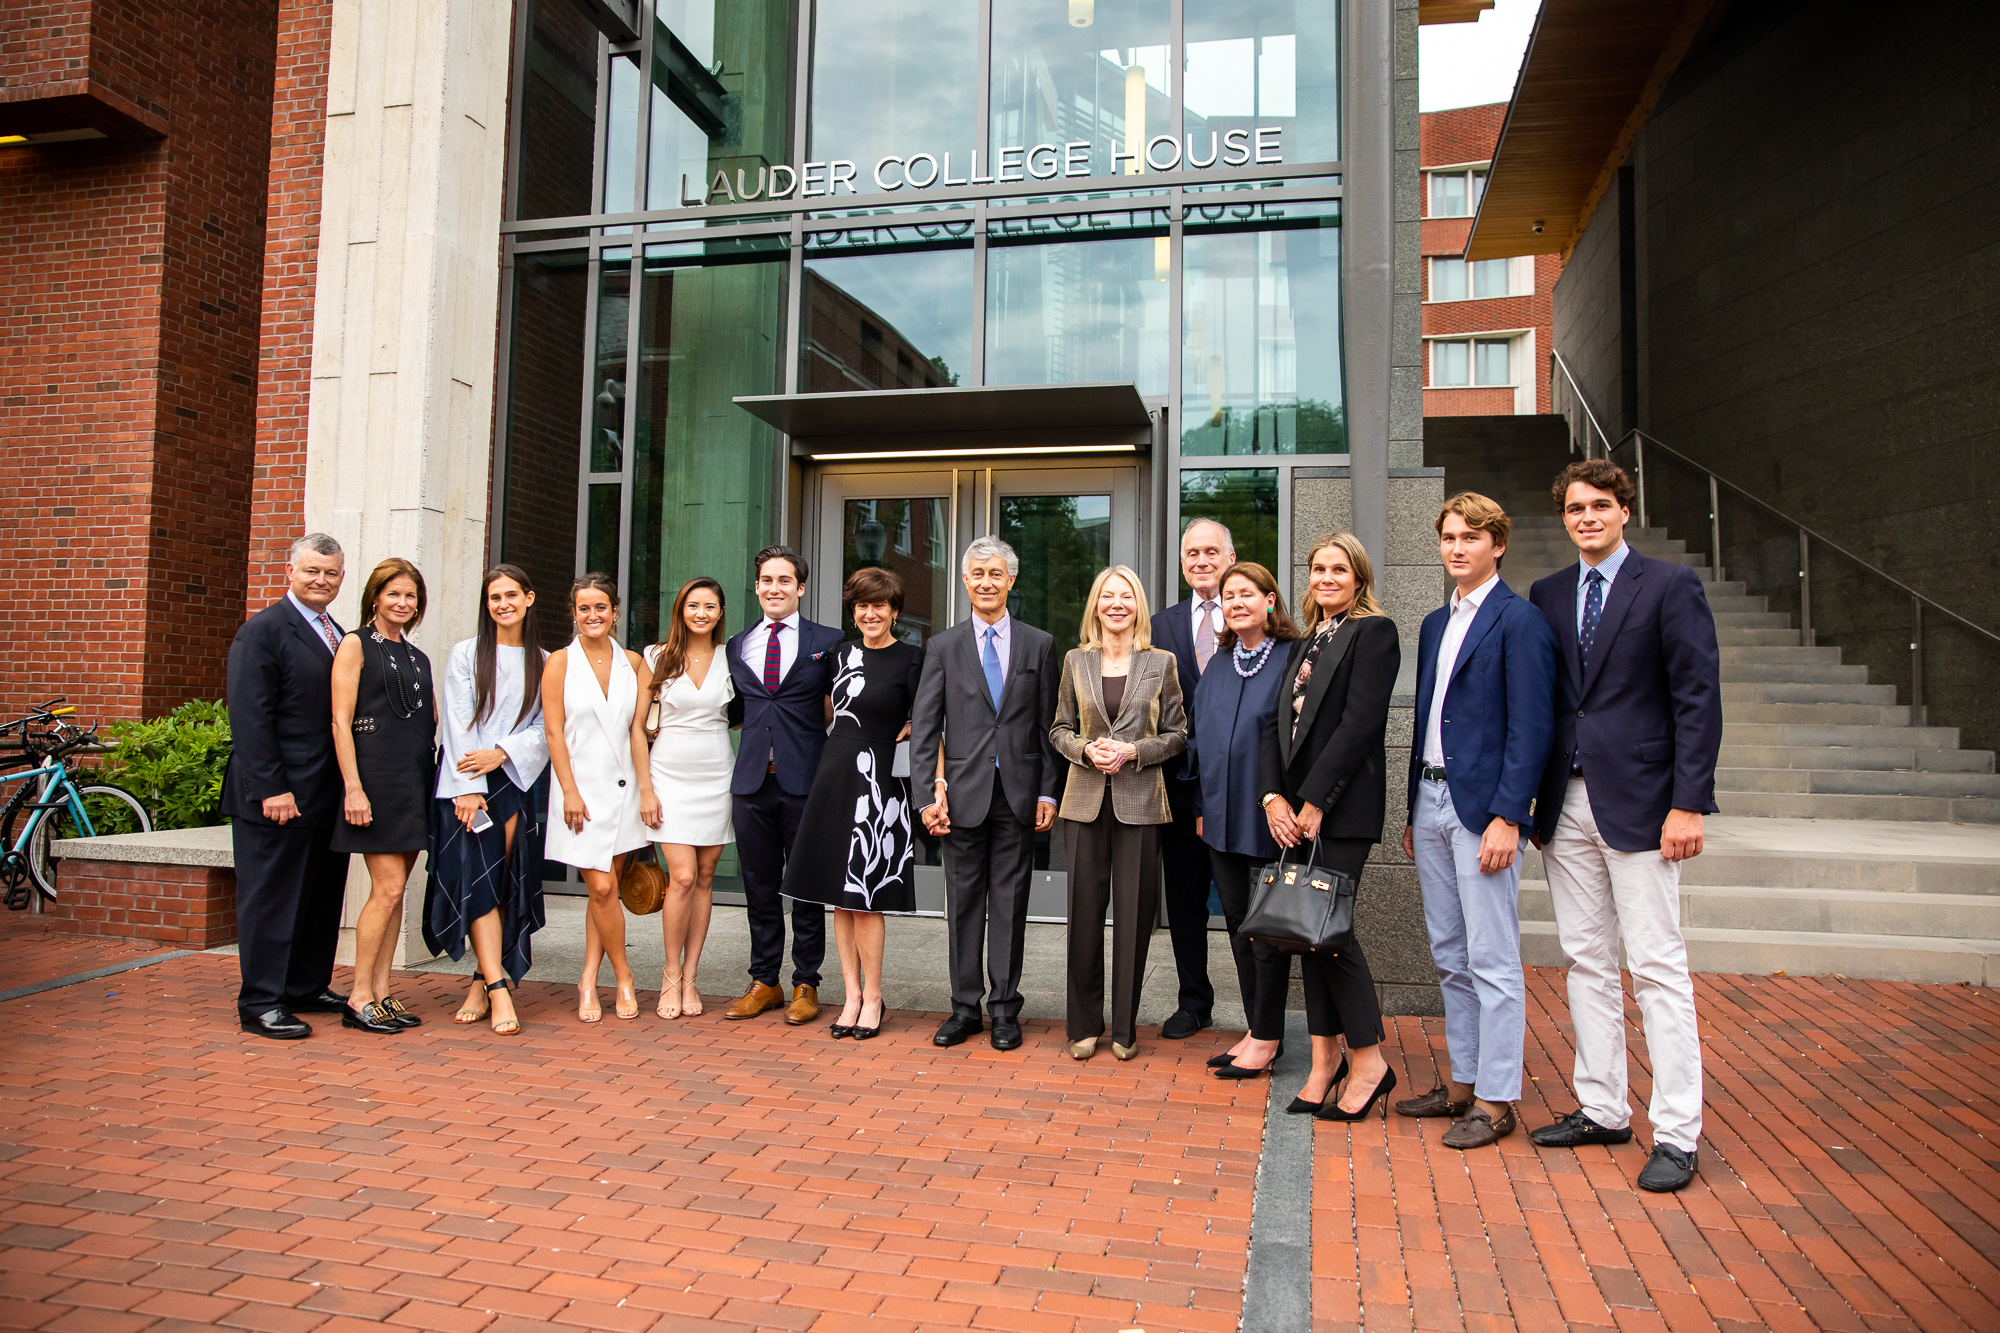 Several generations of Lauder Penn graduates and other family members join President Amy Gutmann in front of the new signage for Lauder College House.